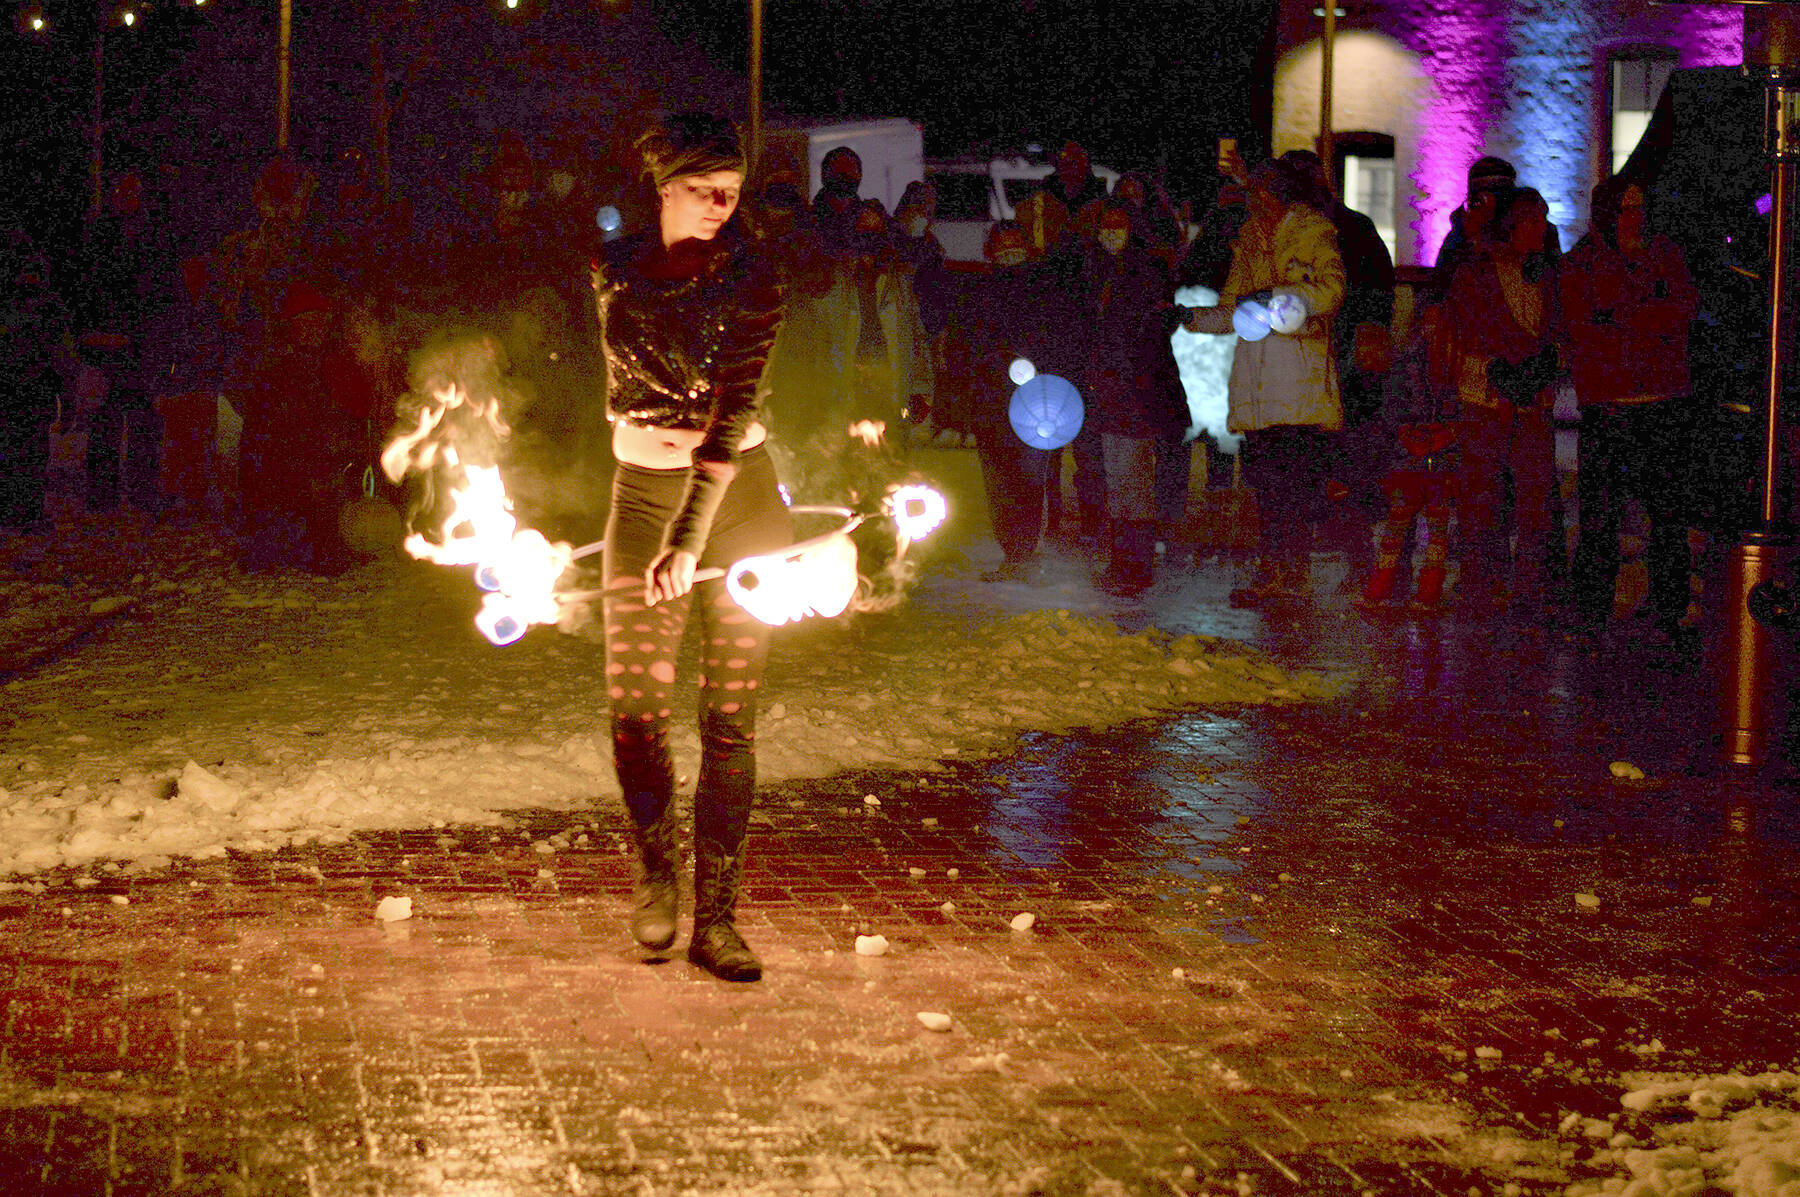 Alex Eisenberg of Port Townsend did some fire dancing during the First Night festivities Friday at downtown's Pope Marine Park. He's part of an ensemble that includes Ashley Kehl of Port Townsend and Cristy Christensen of Bellingham.  Diane Urbani de la Paz/Peninsula Daily News